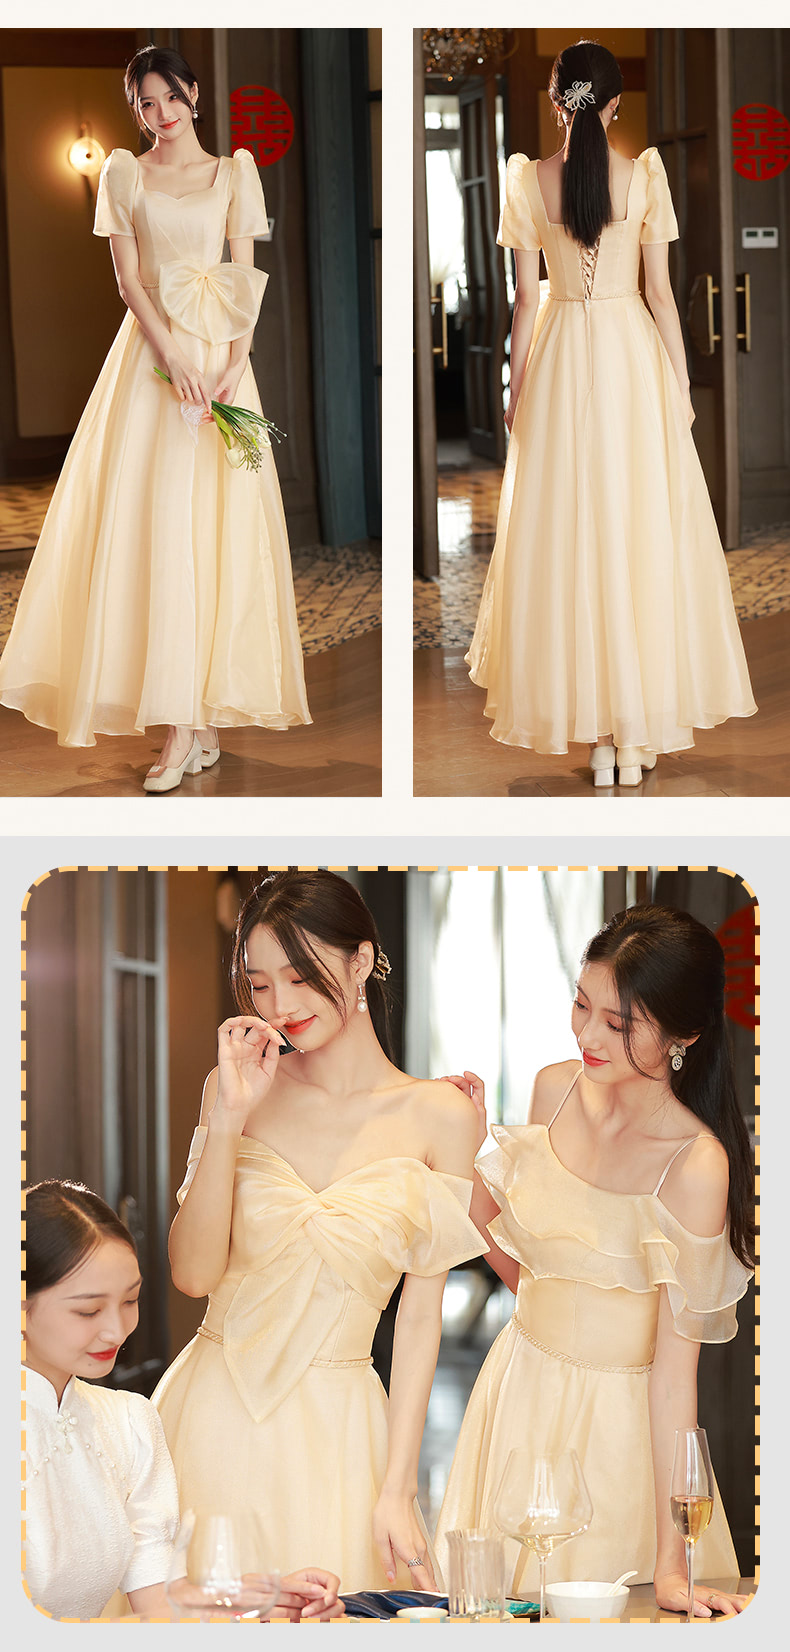 Champagne-Bridesmaid-Cocktail-Party-Long-Dress-Formal-Gown20.jpg